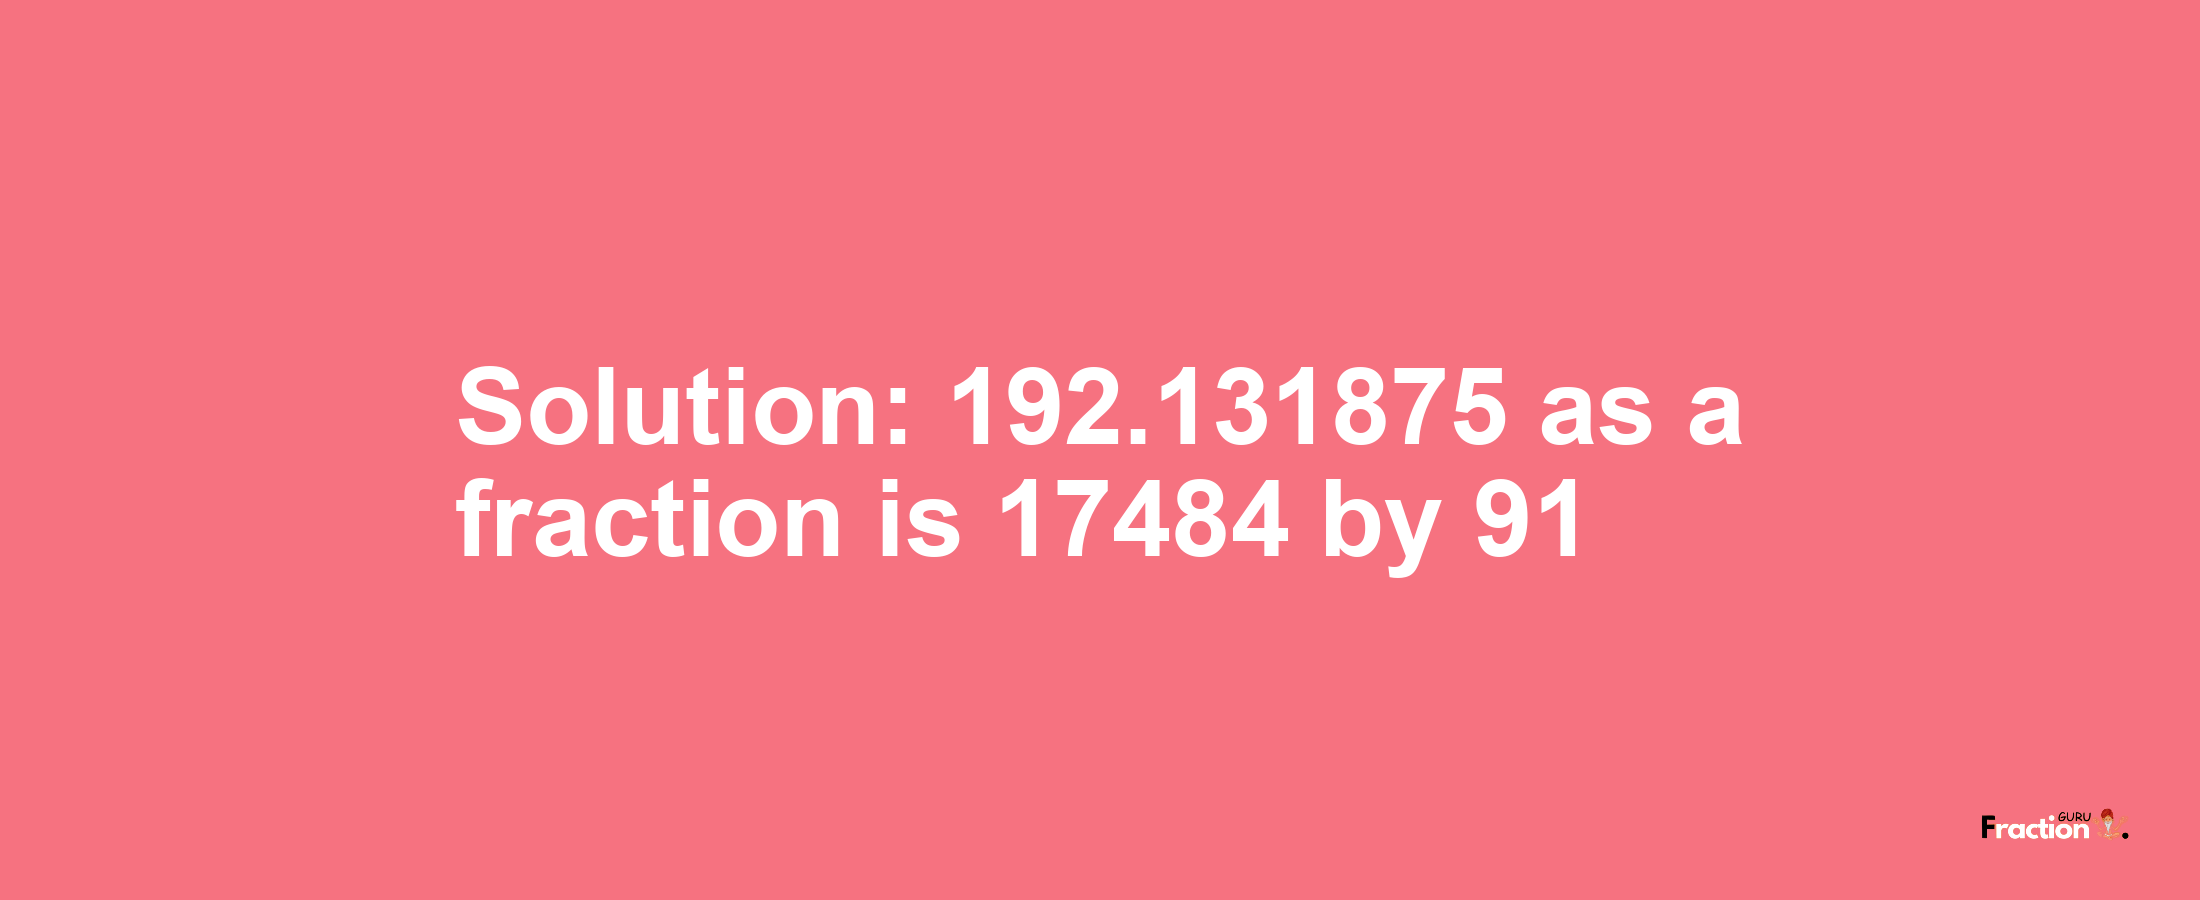 Solution:192.131875 as a fraction is 17484/91